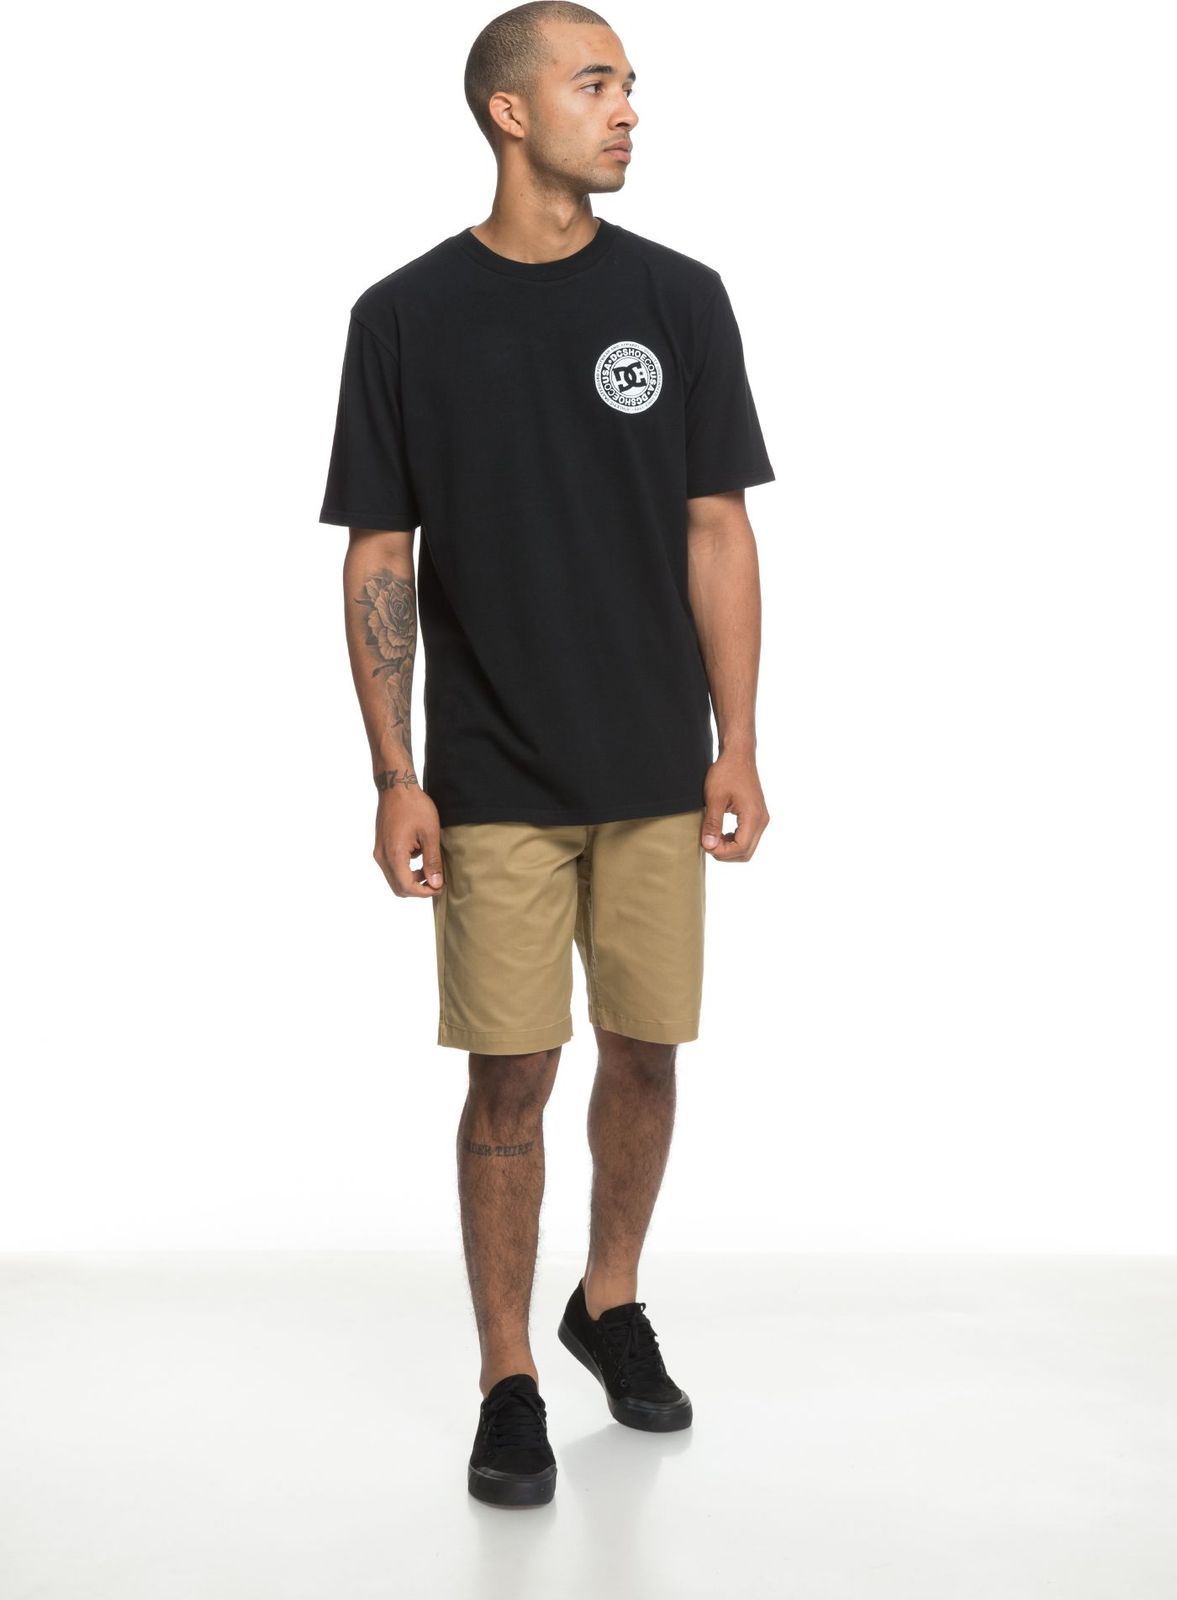   DC Shoes Worker Straight, : . EDYWS03111-CLM0.  31 (44/46)